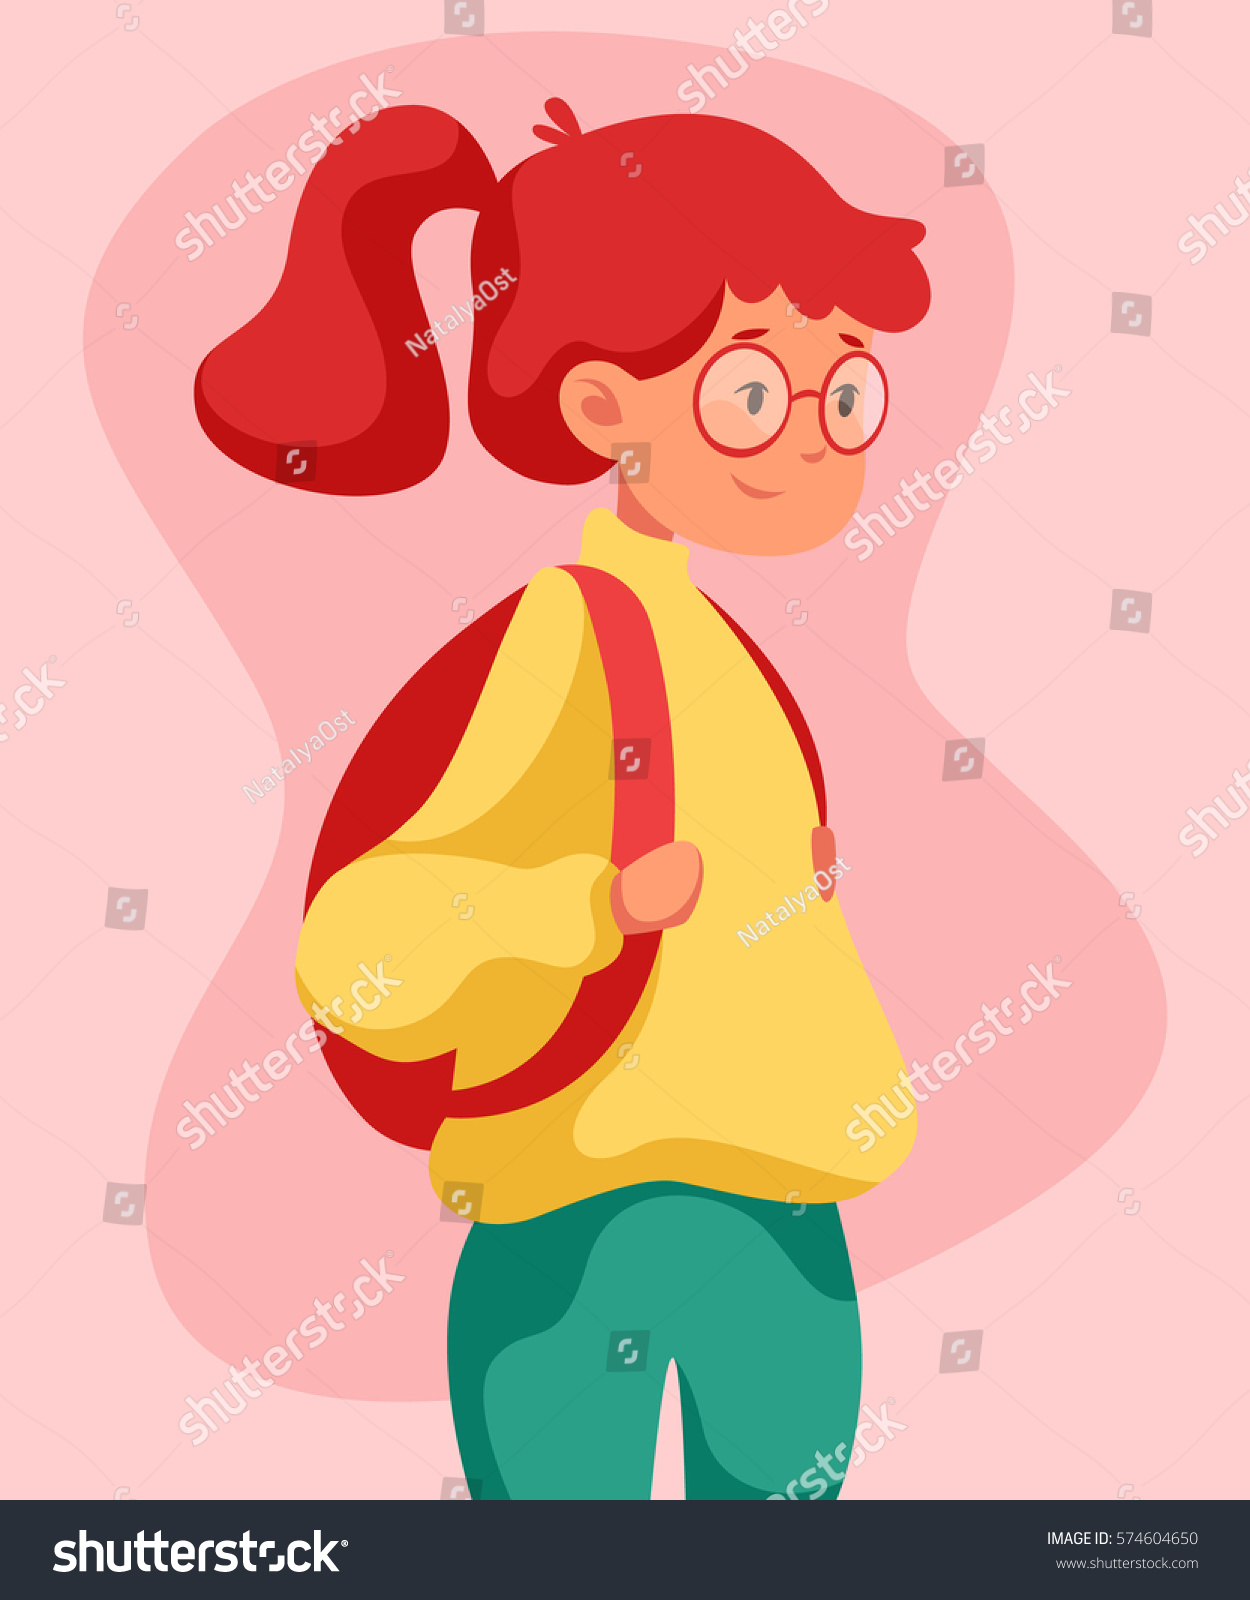 Images Of Cartoon Character With Glasses And Red Hair